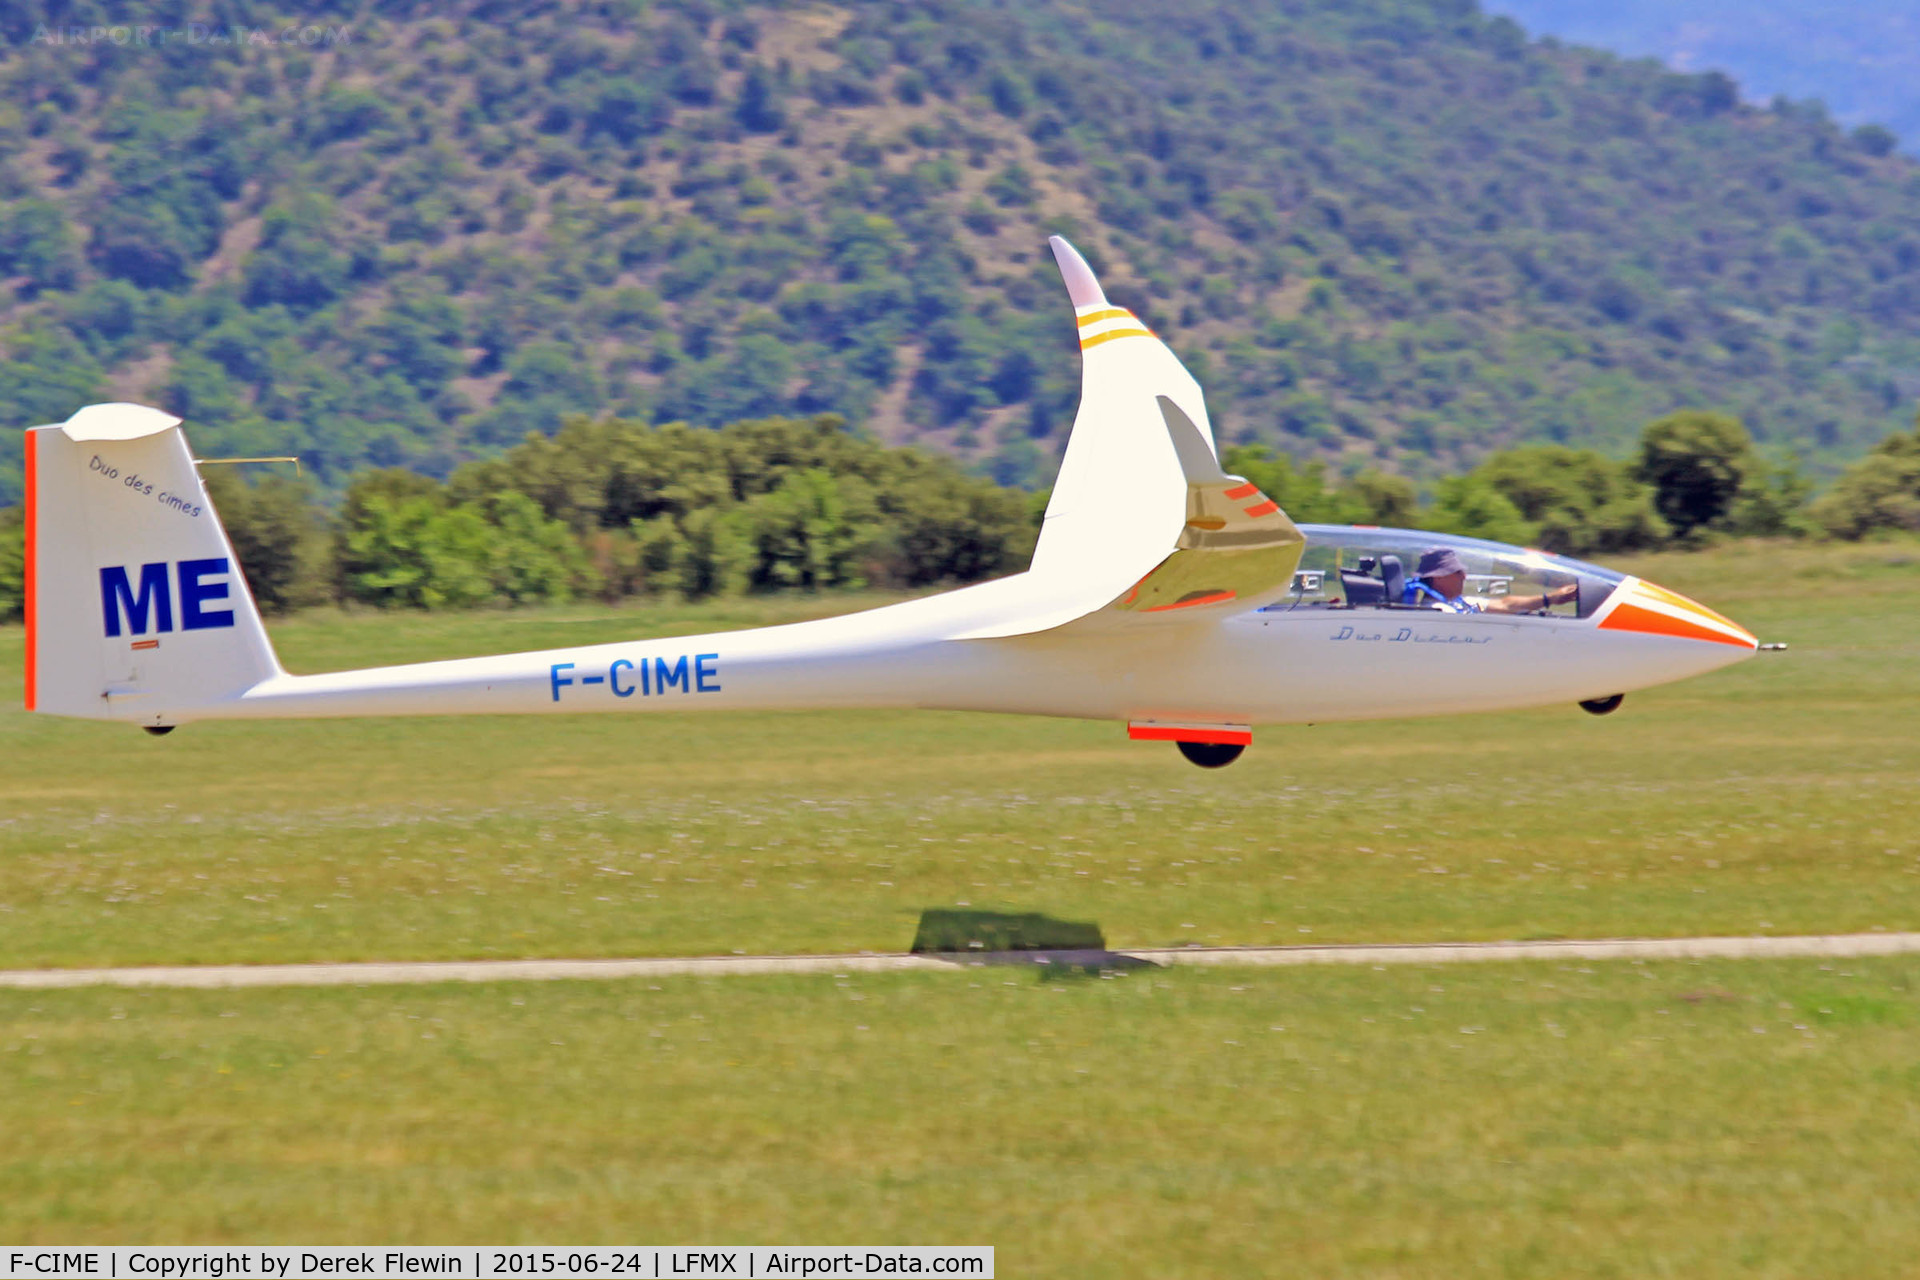 F-CIME, Schempp-Hirth DUO-DISCUS C/N 218, Duo-Discus, coded ME, seen departing on aerotow.